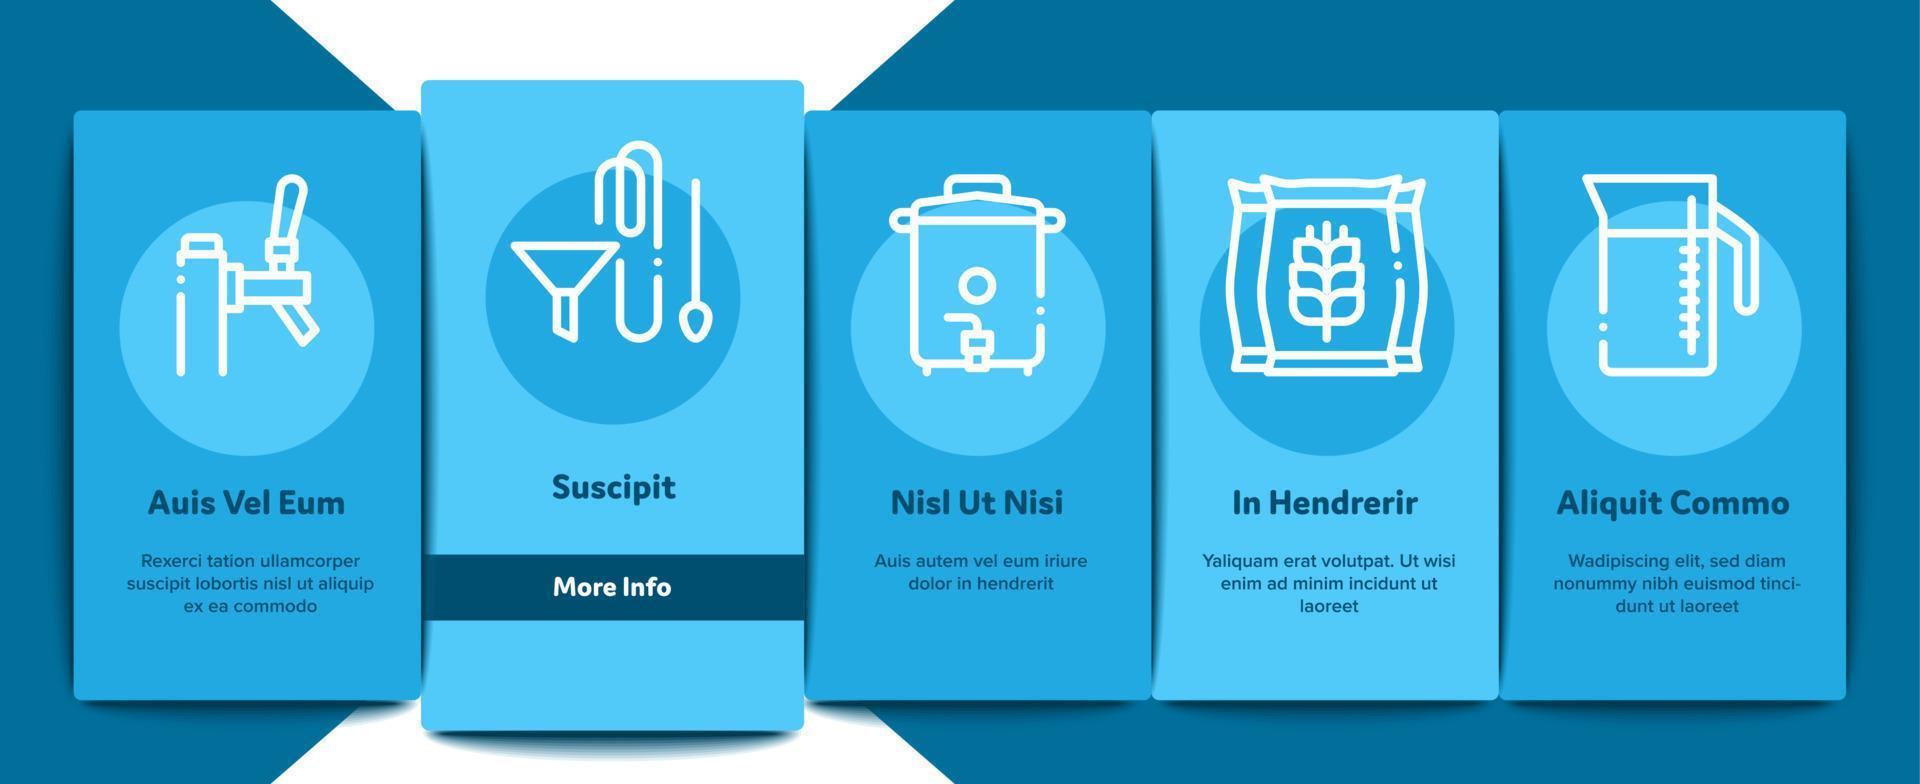 Home Brewing Beer Onboarding Elements Icons Set Vector